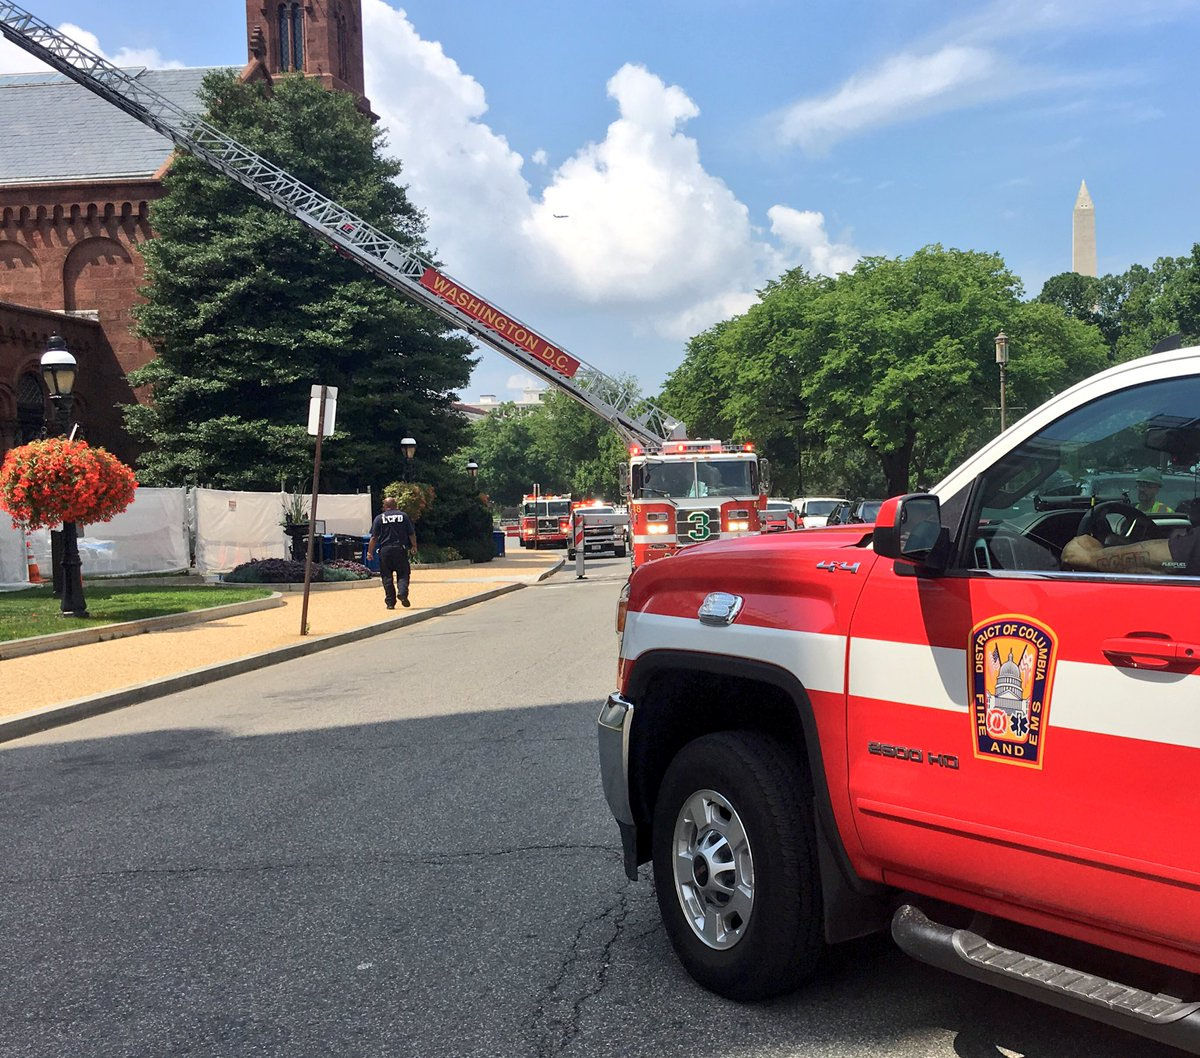 D.C. fire crews responded to a small fire on the fourth floor of the Smithsonian Castle. (Courtesy D.C. Fire and EMS)